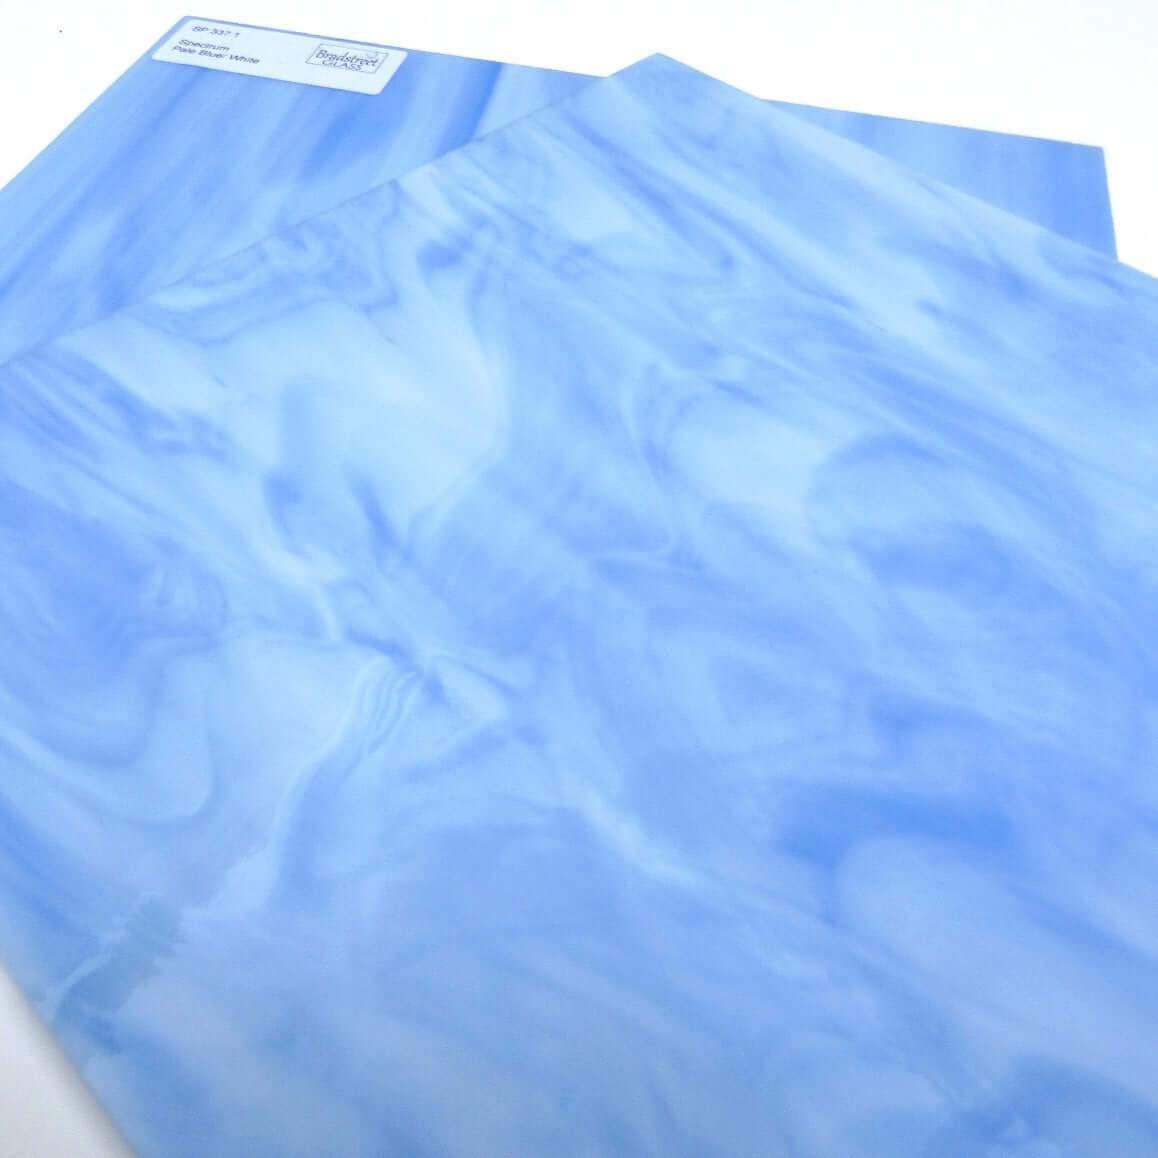 Spectrum SP 337.1 Stained Glass Sheet Pale Blue White Opal Streaky Swirled Opaque